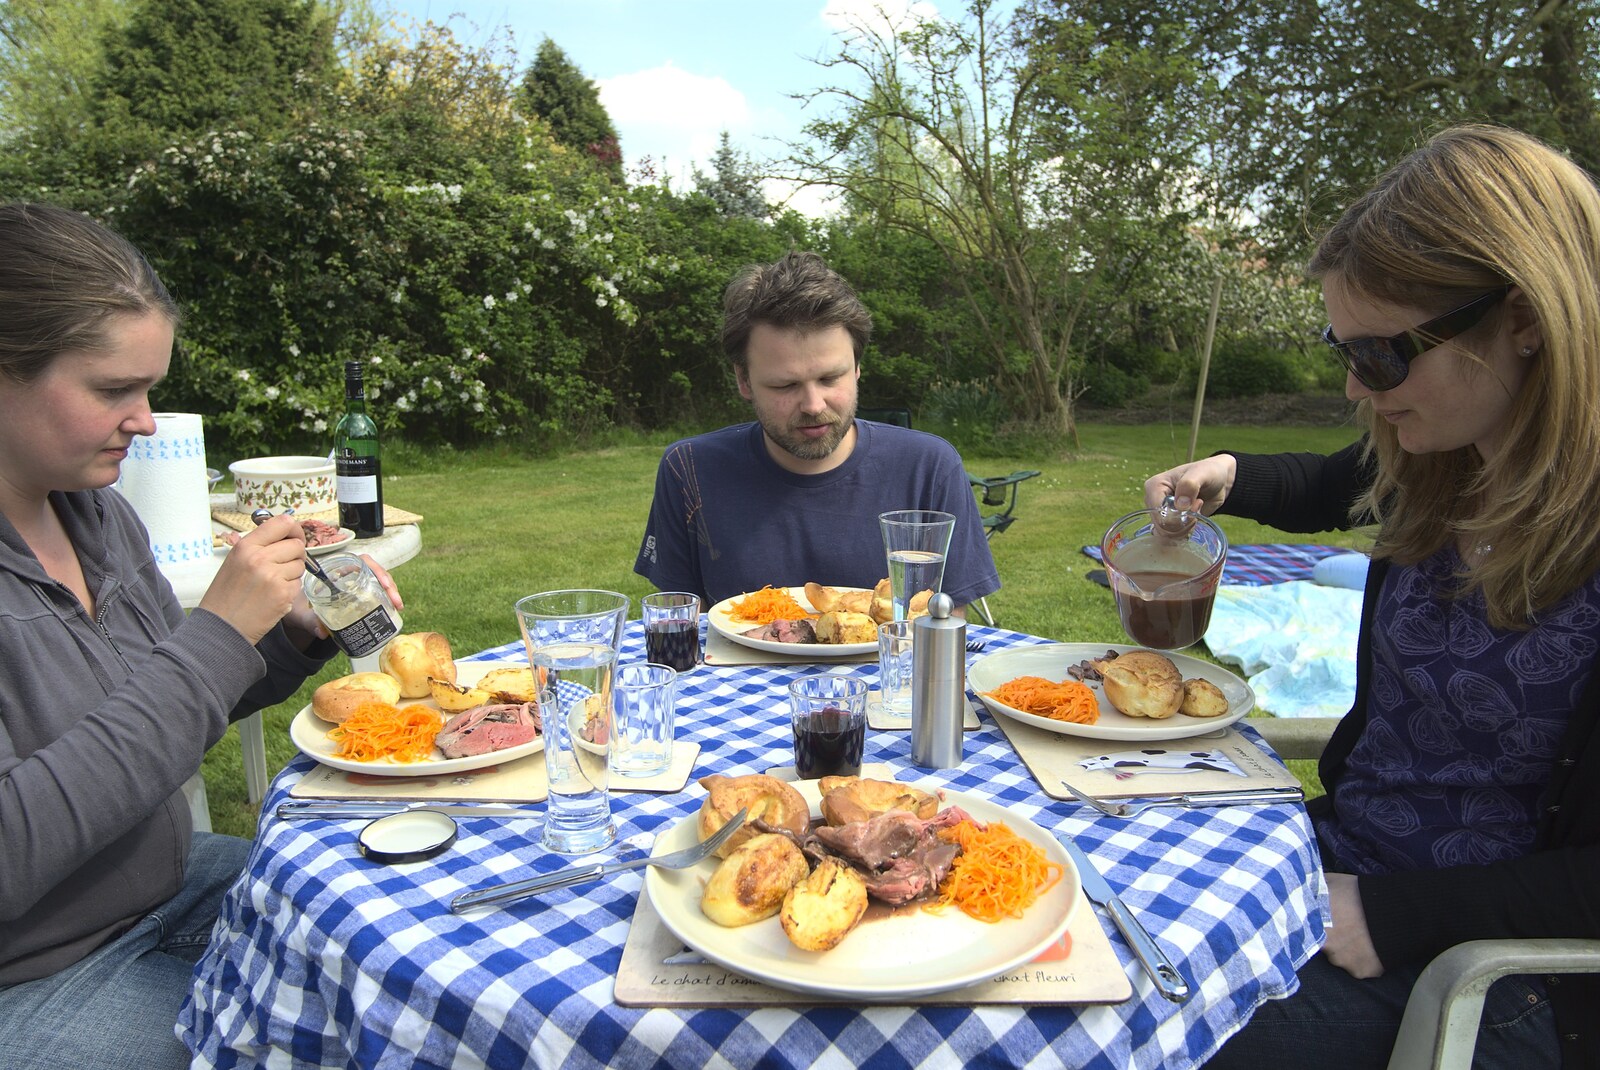 We have roast dinner in the garden from A Visit from Rachel and Sam, Brome, Suffolk - 26th April 2009